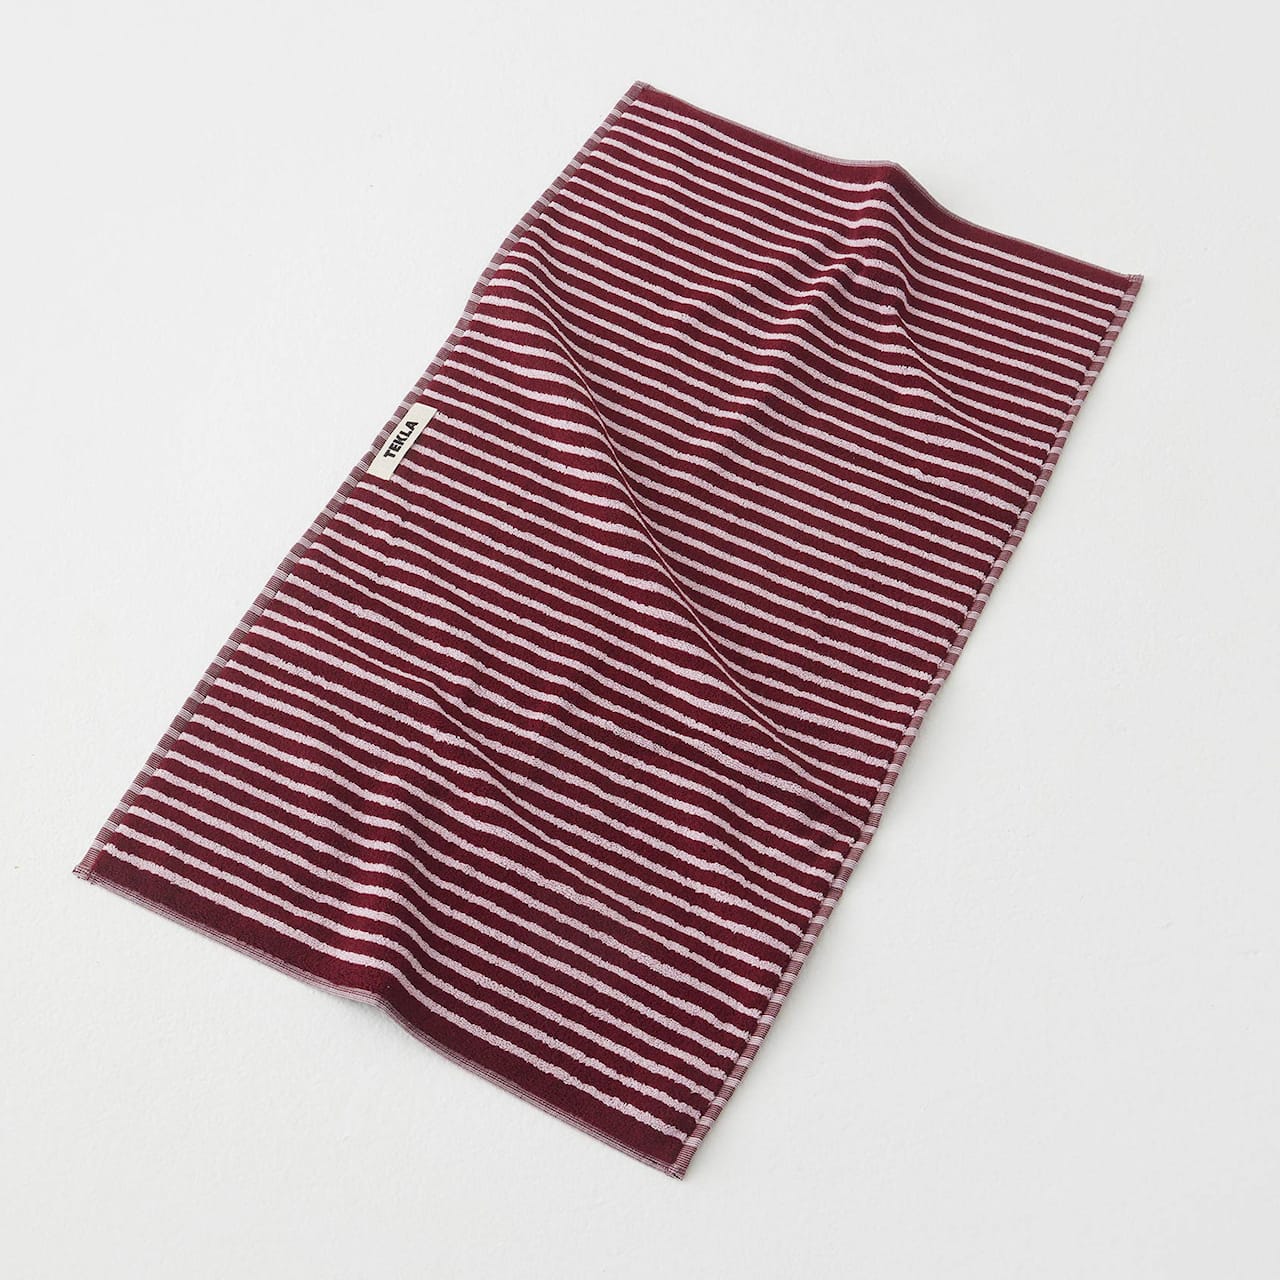 Terry Towel Striped Red  Rose